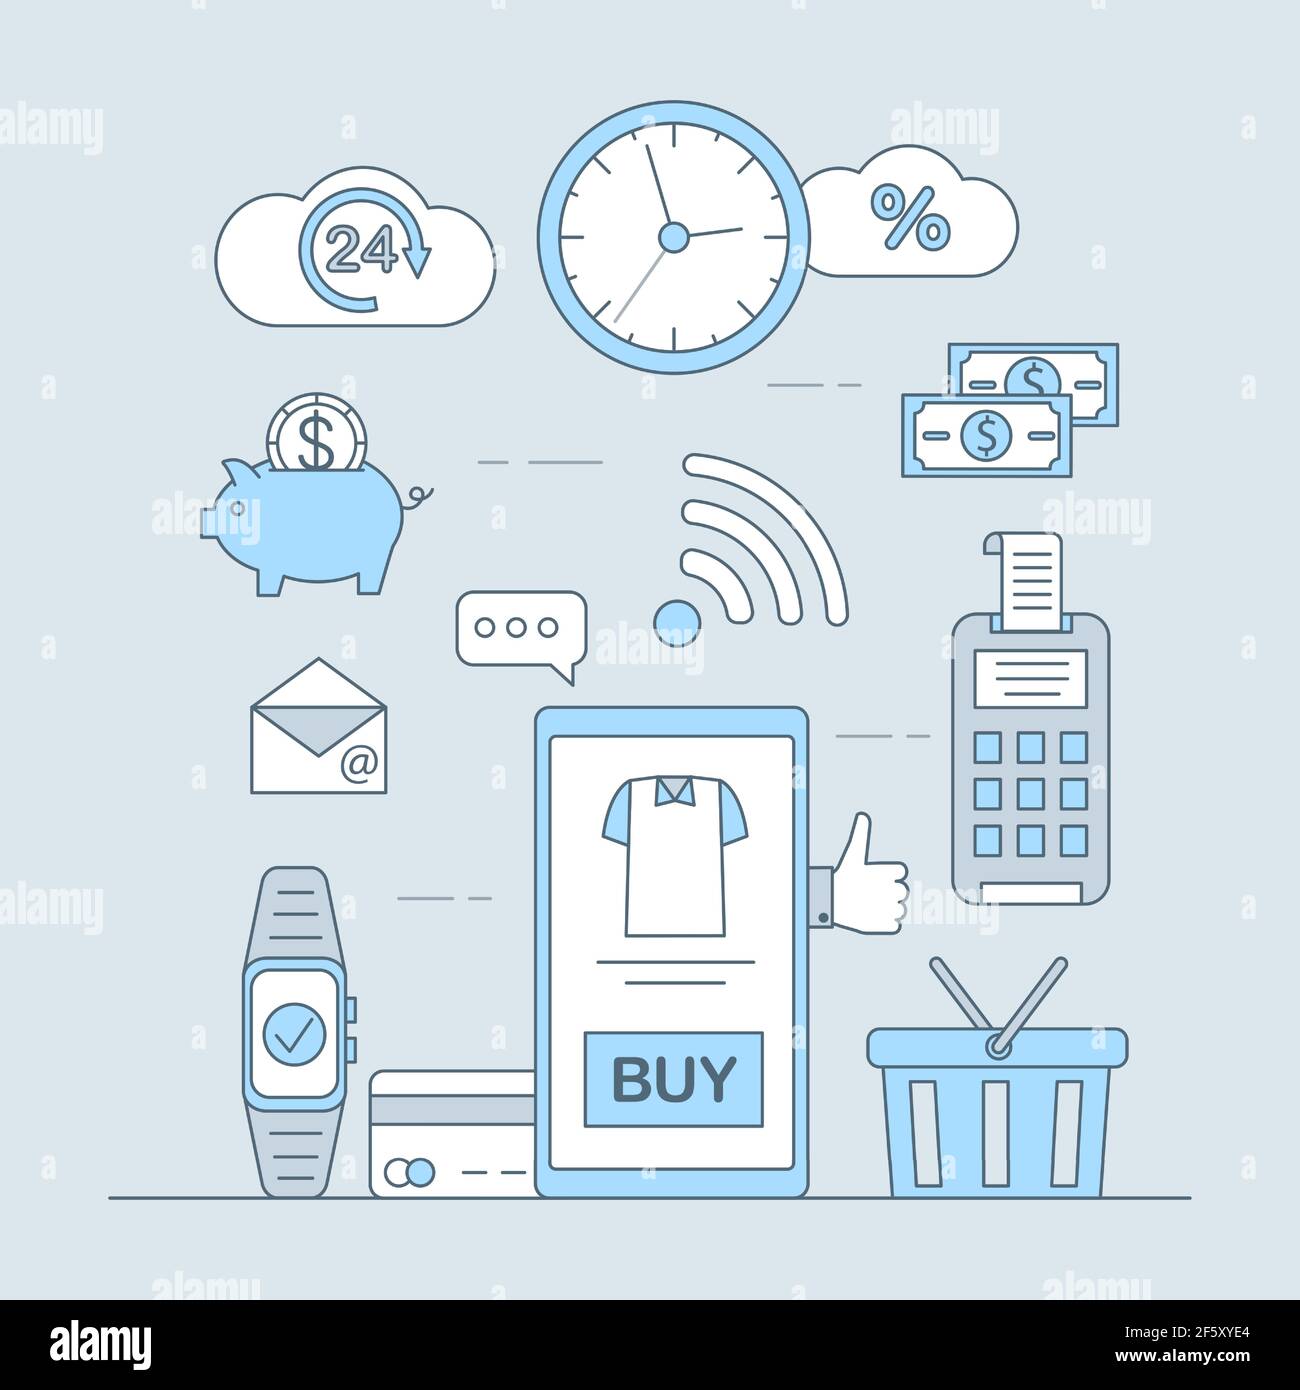 Shopping application, online payment vector cartoon outline illustration. Paying via smartwatches, smartphone, credit, or debit card. Wireless payment on POS terminal, NFC payment concept. Stock Vector